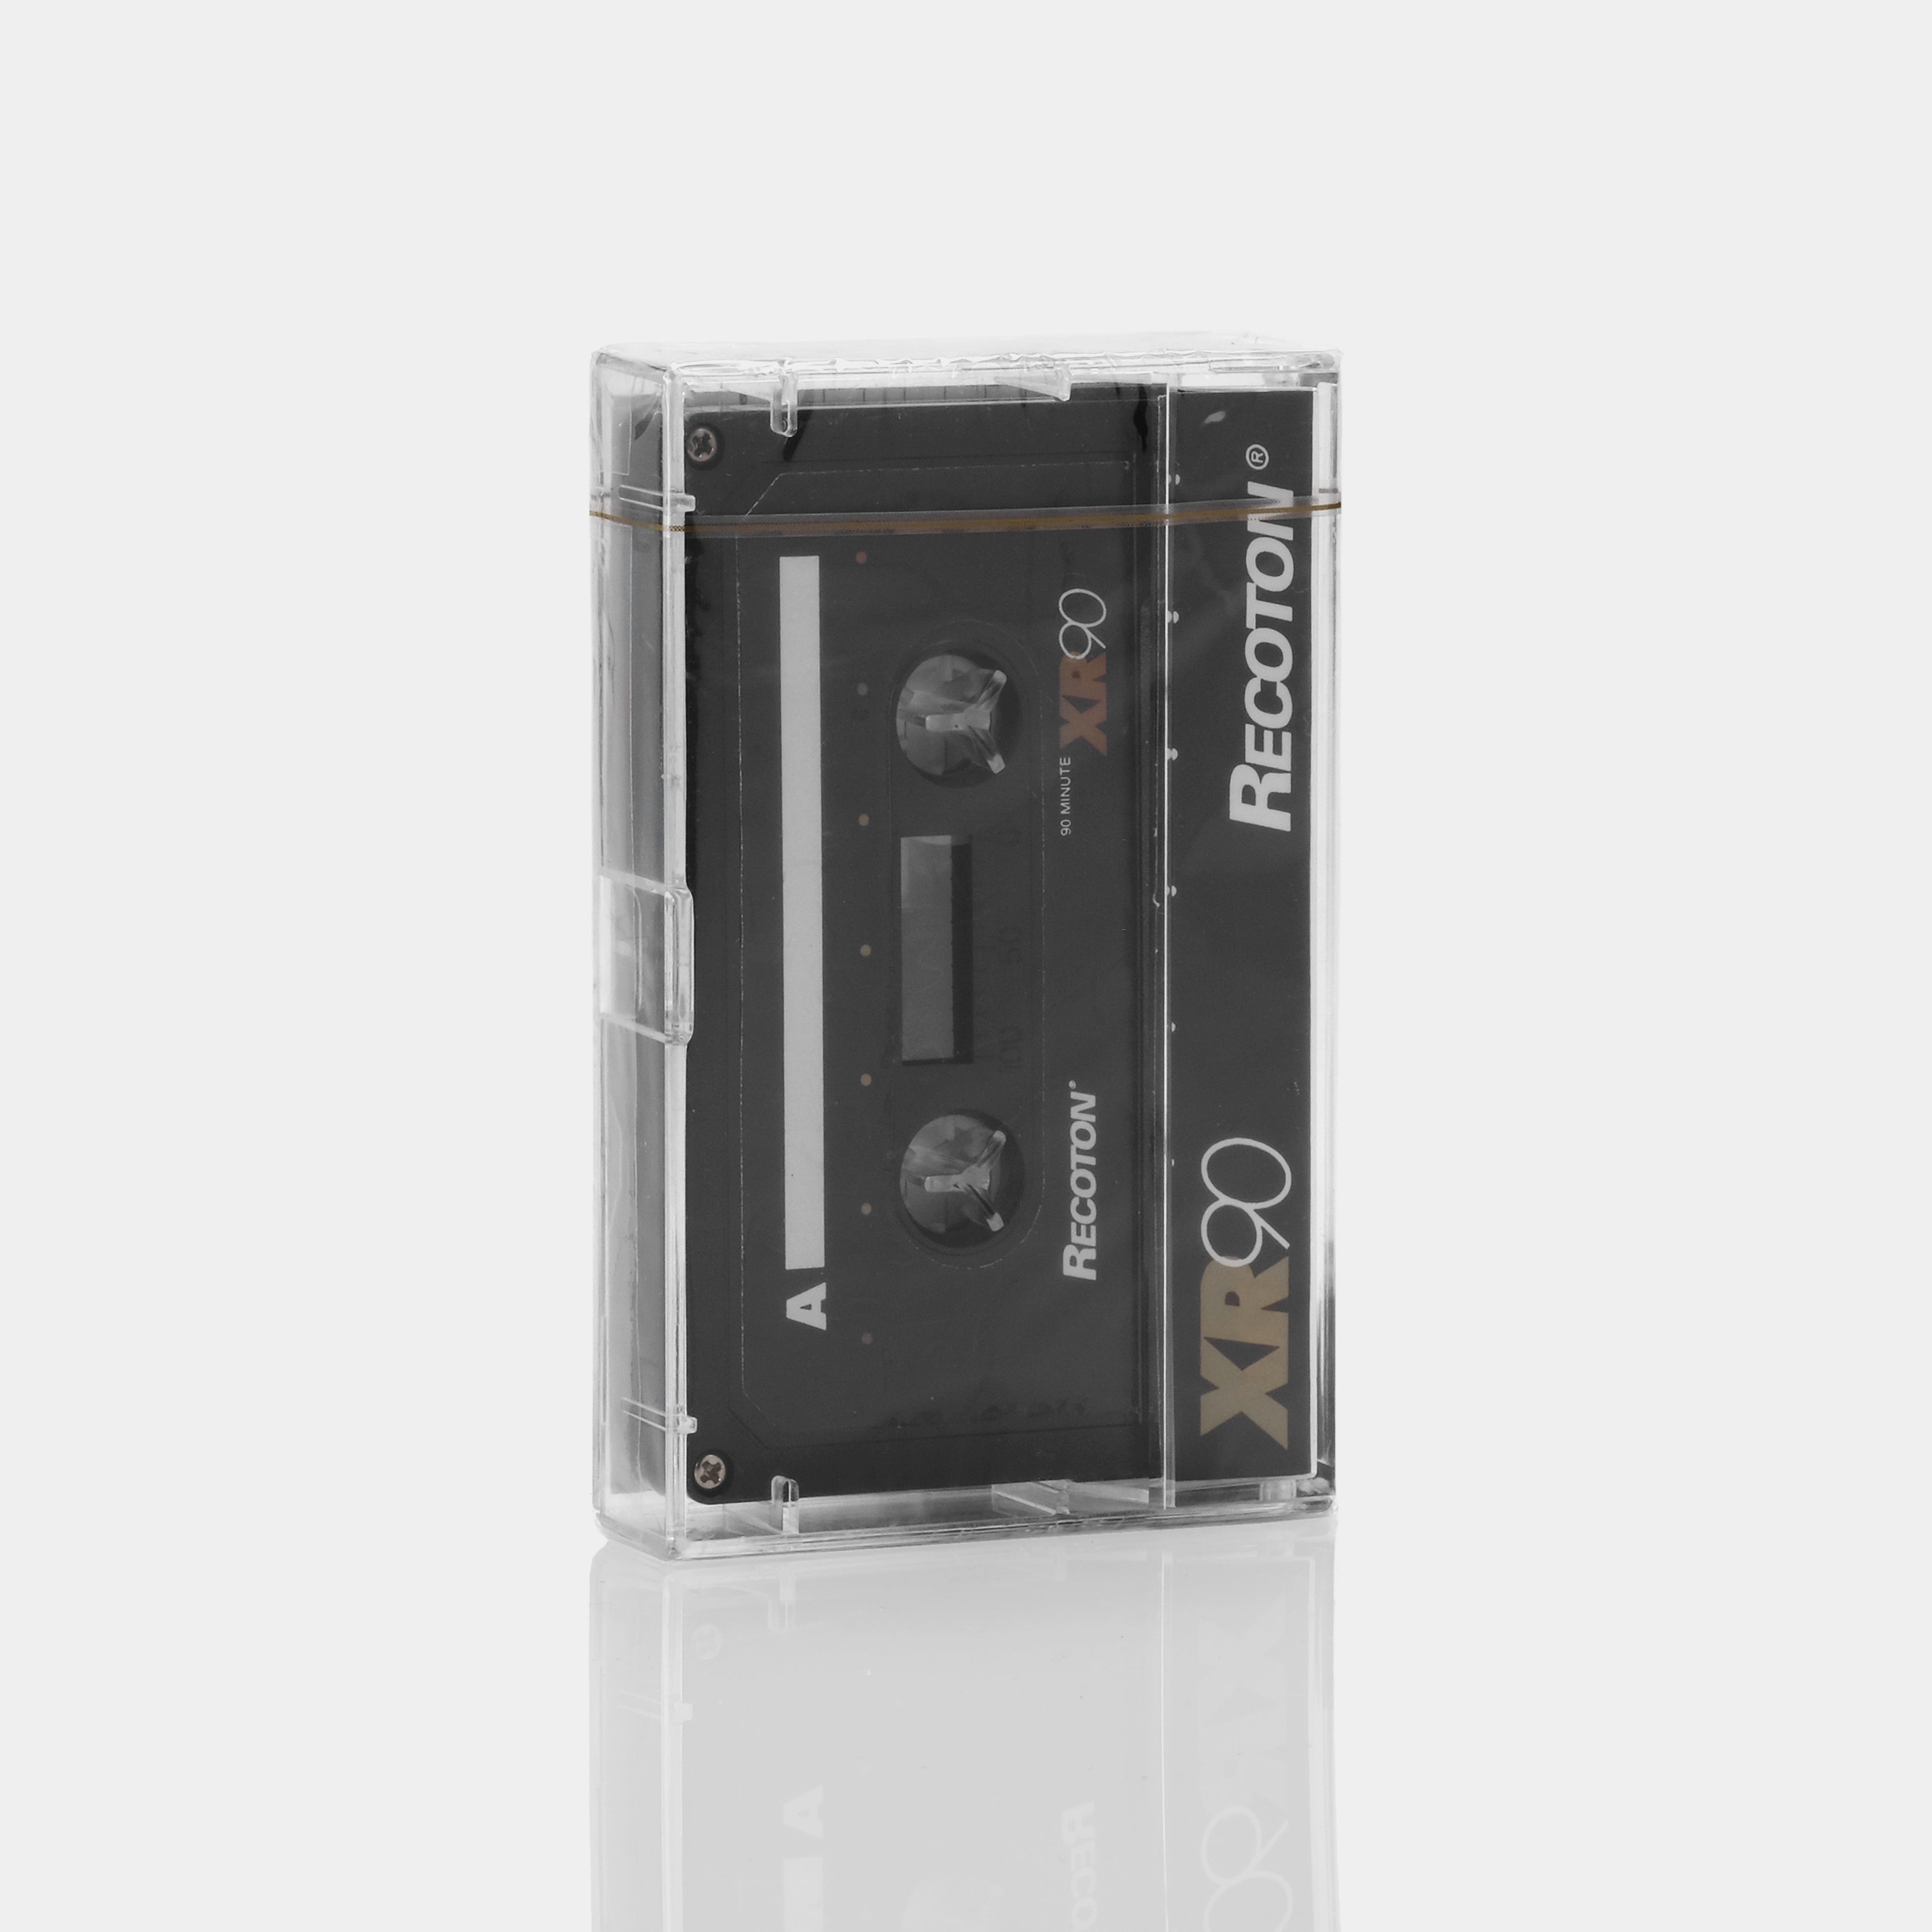 Recoton XR90 Gold Series Blank Recordable Cassette Tape